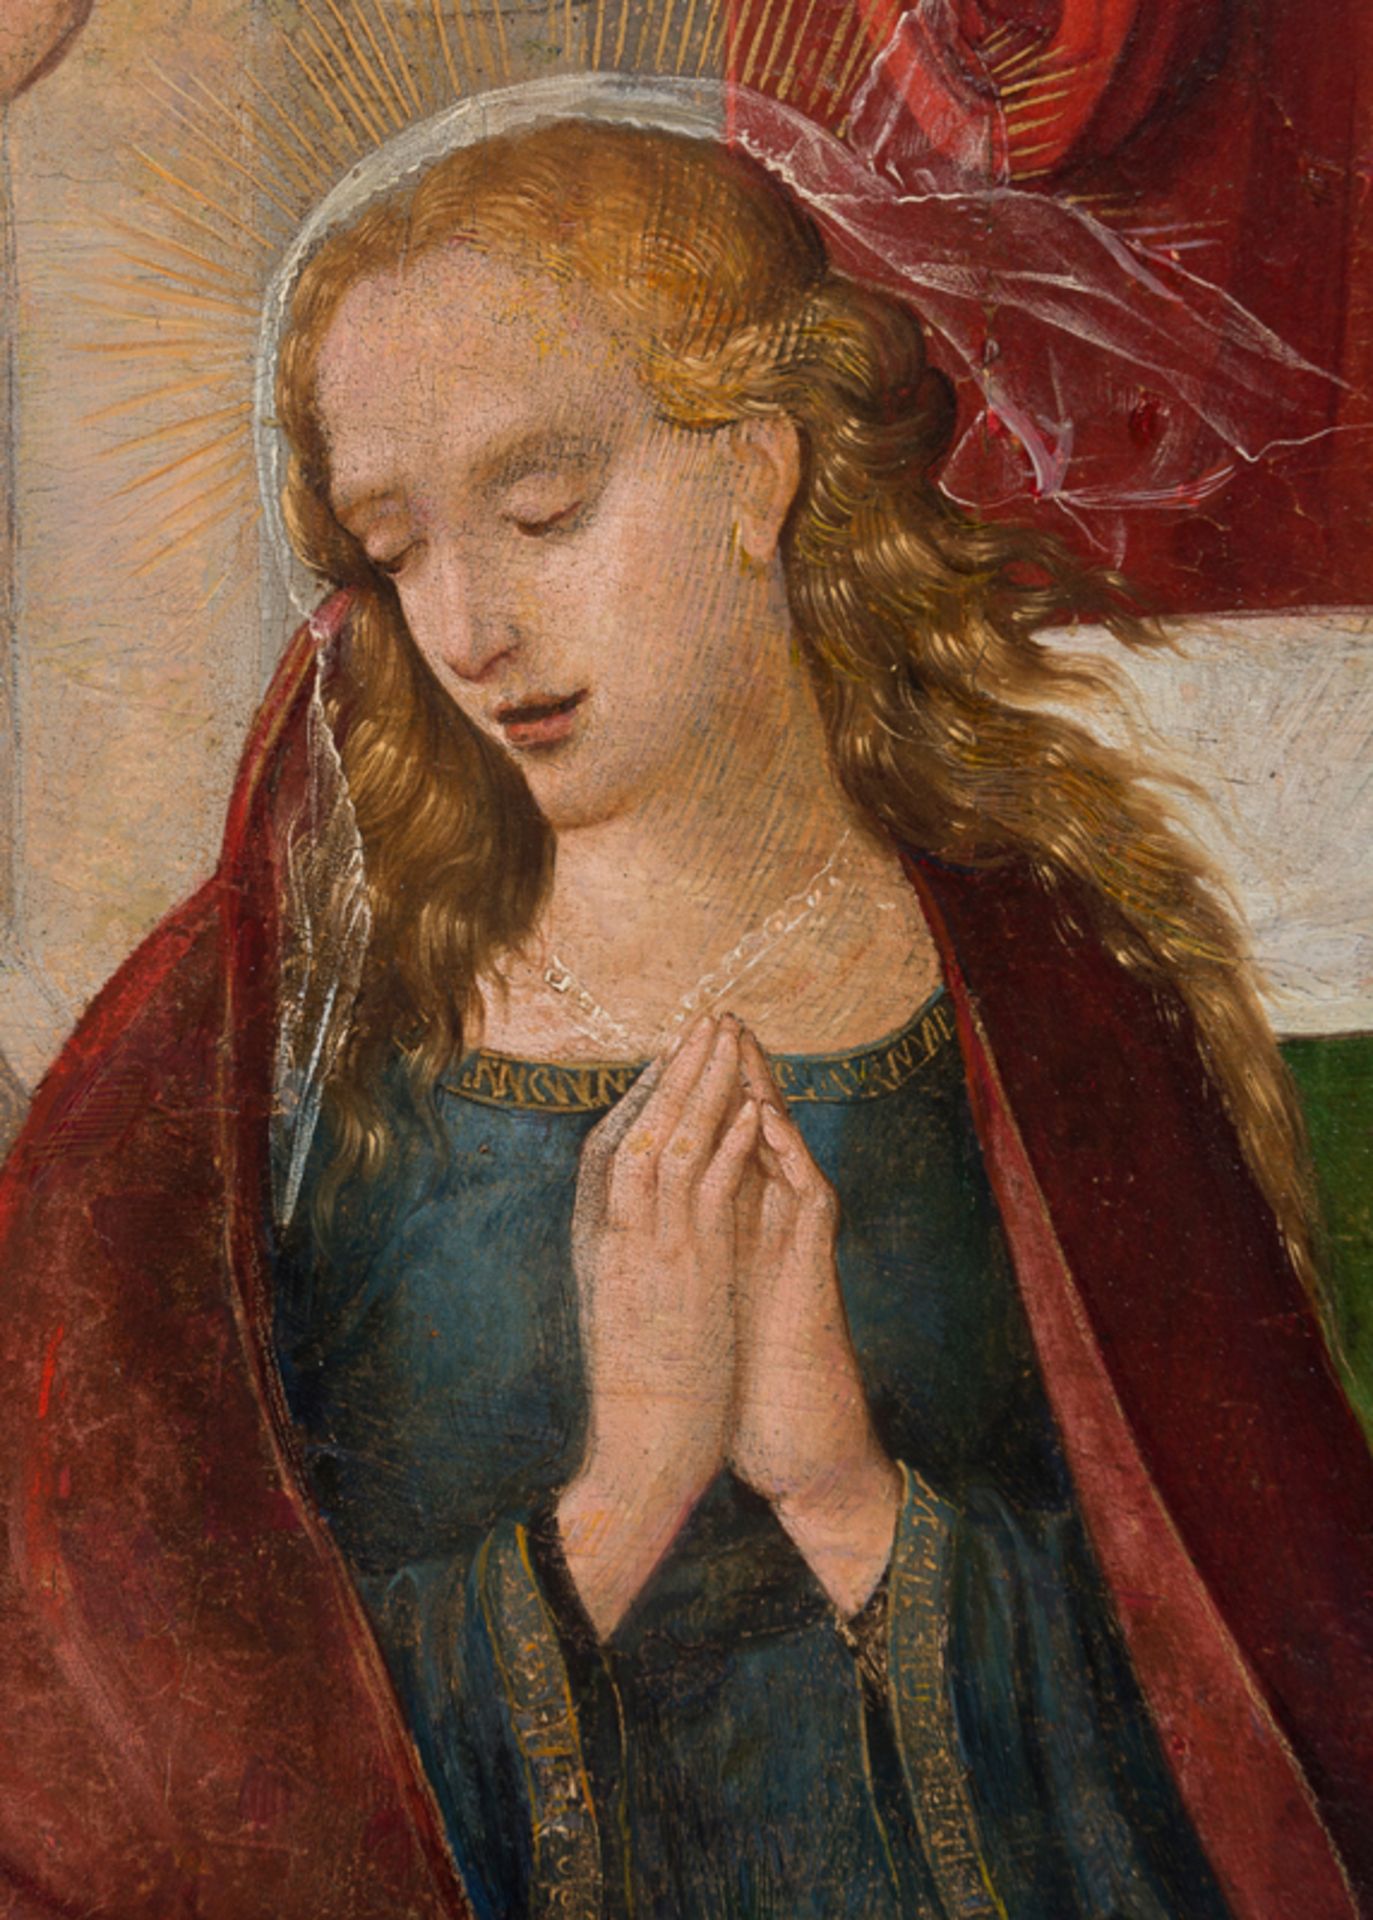 Spanish School. 16th century.Spanish School. 16th century. "The Annunciation" Oil on panel. 113 x 92 - Image 2 of 7